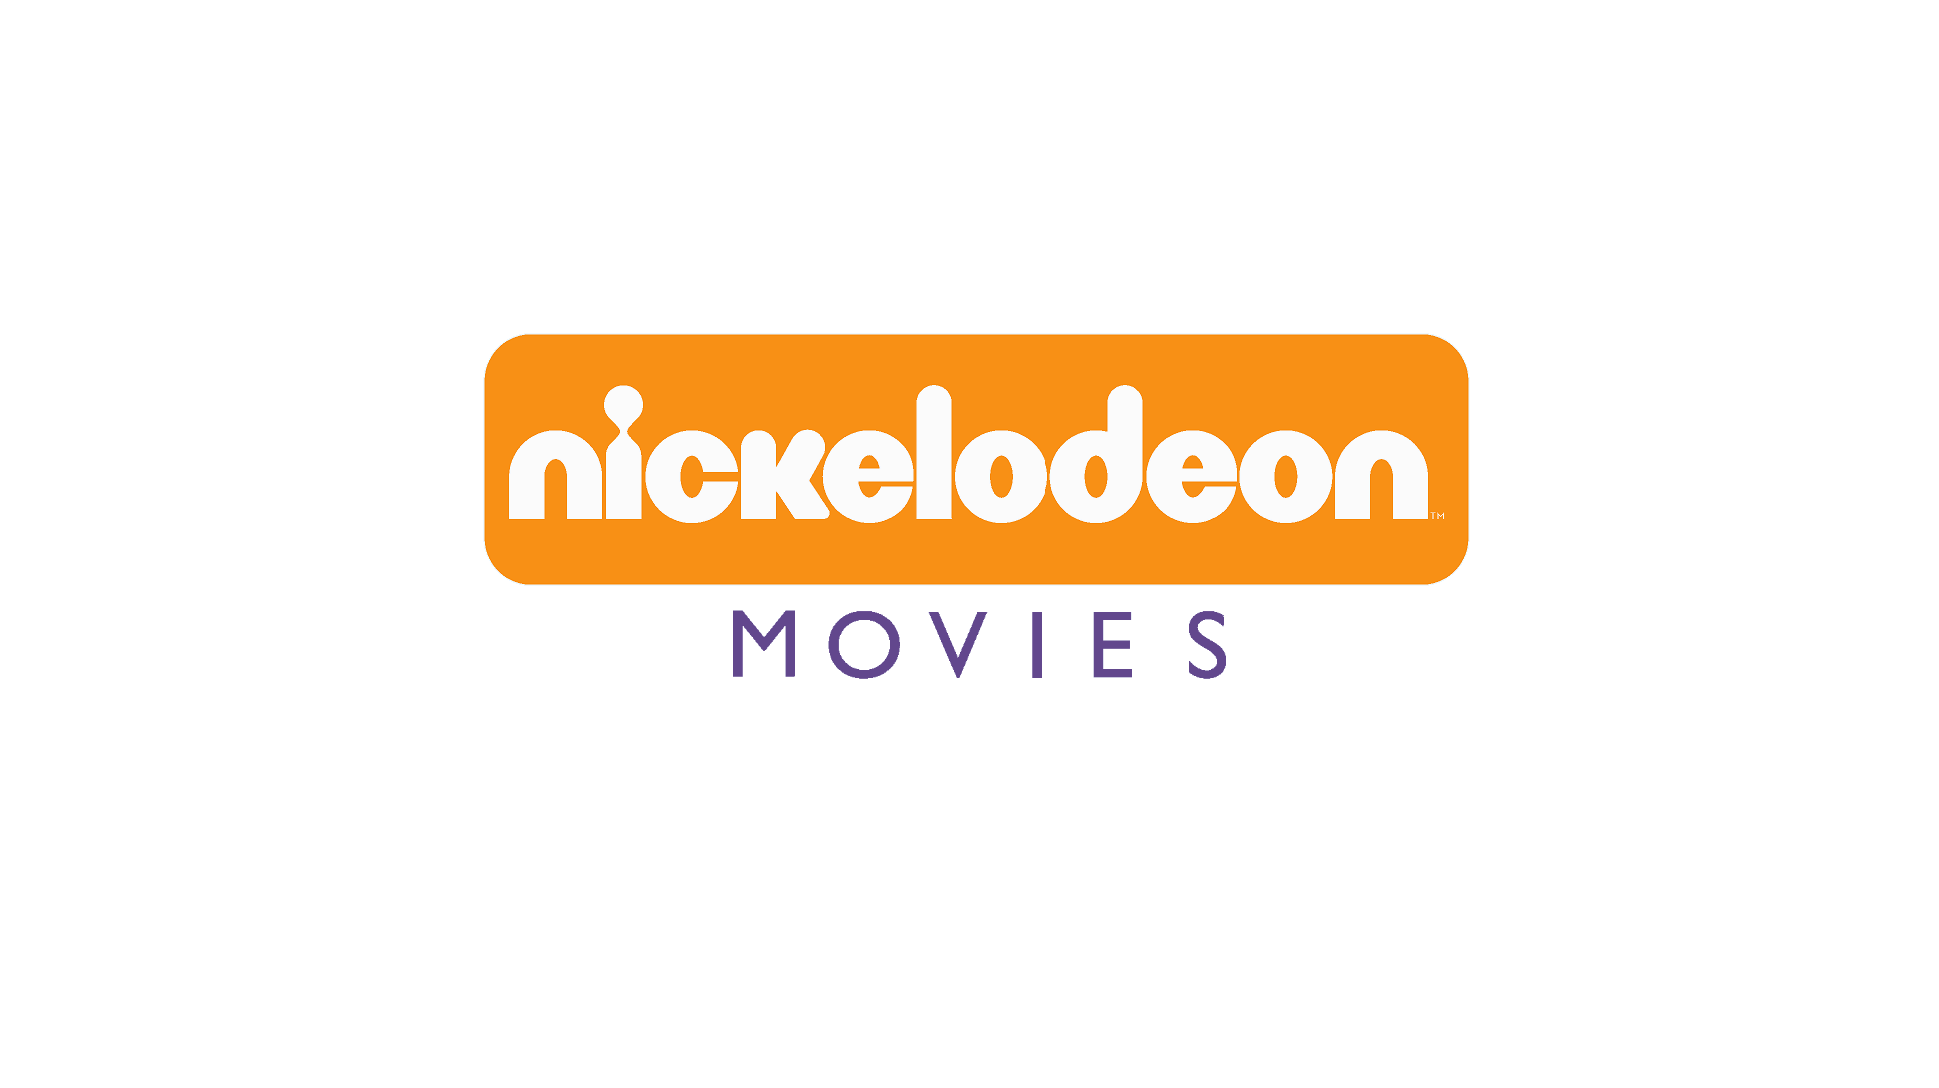 Nickelodeon Movies Logo - Nickelodeon Movies Logo Fanmade.png